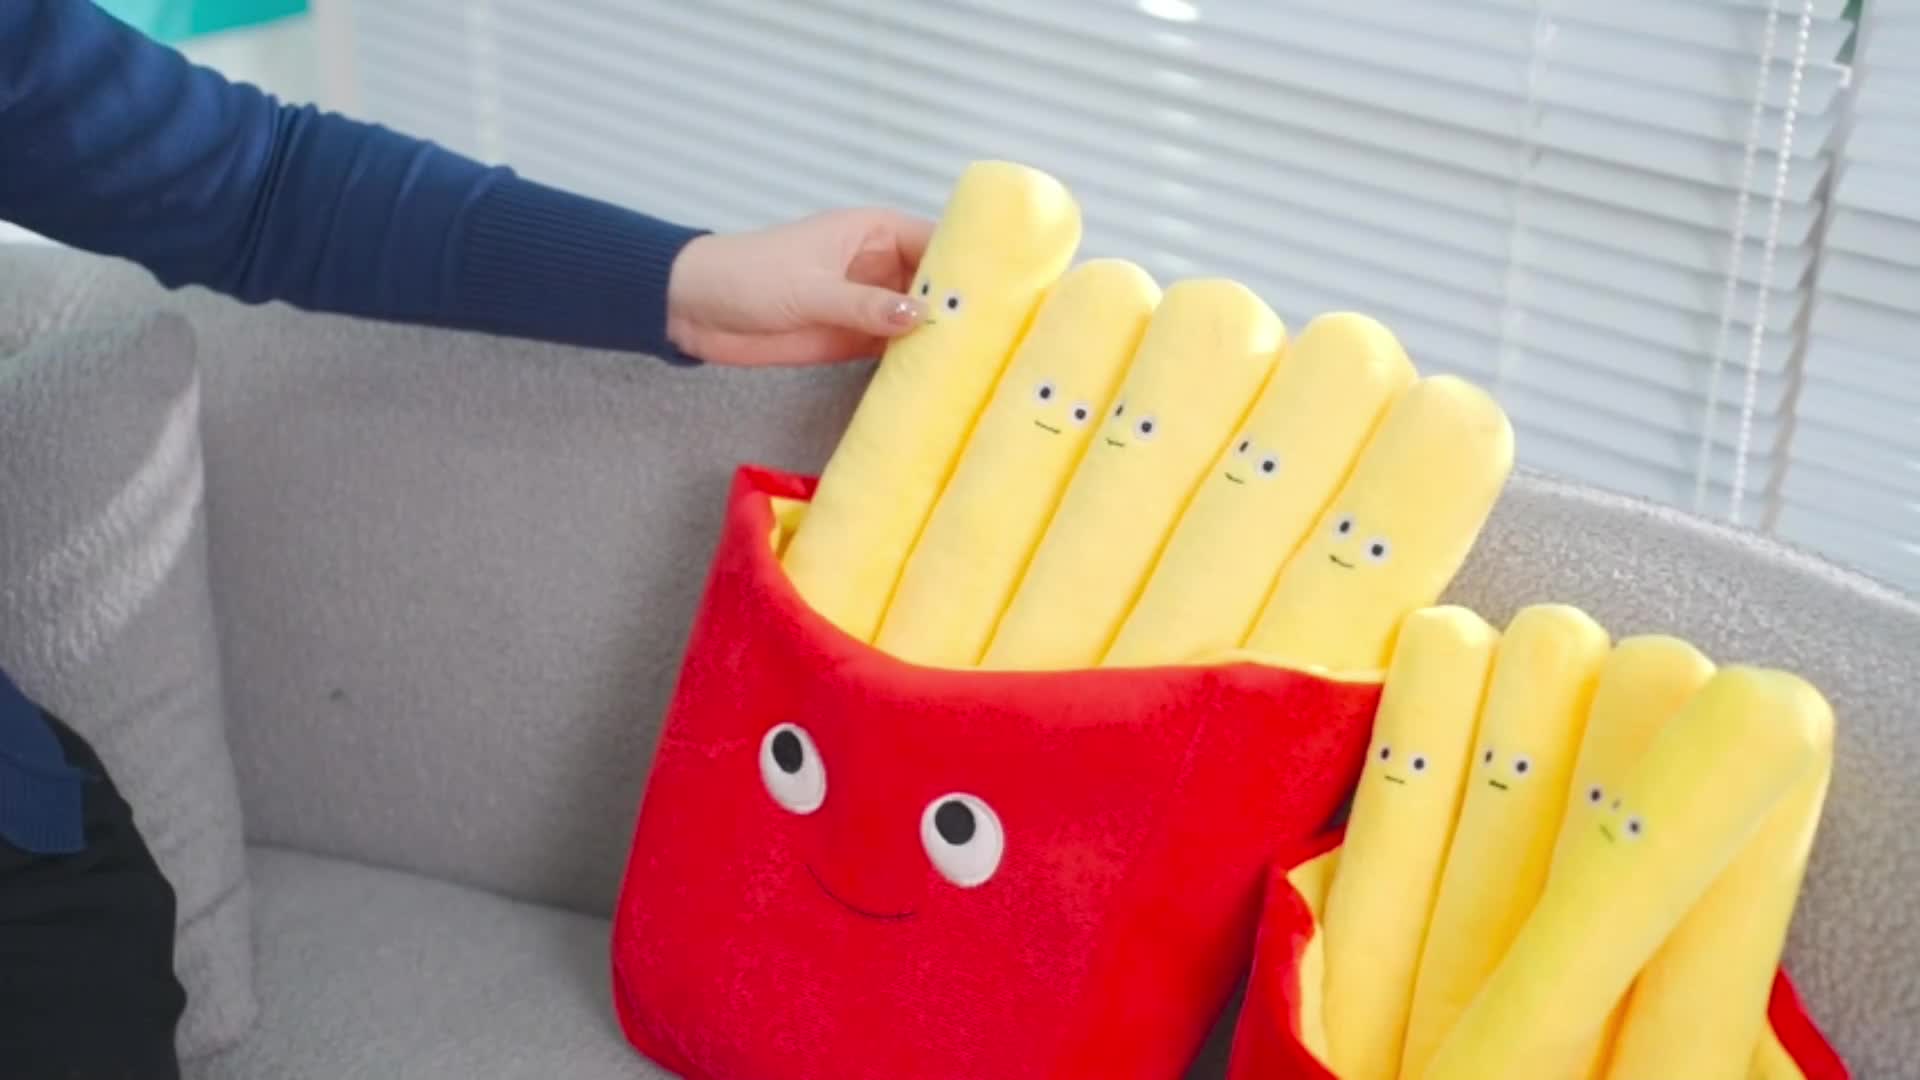 1pc Plush Stuffed Toy - Emotional Support Fries Smile Face, Home & Auto  Decorative Sofa Pillow, Pretend Play Fries Shaped Cushion Accessories For  Kids